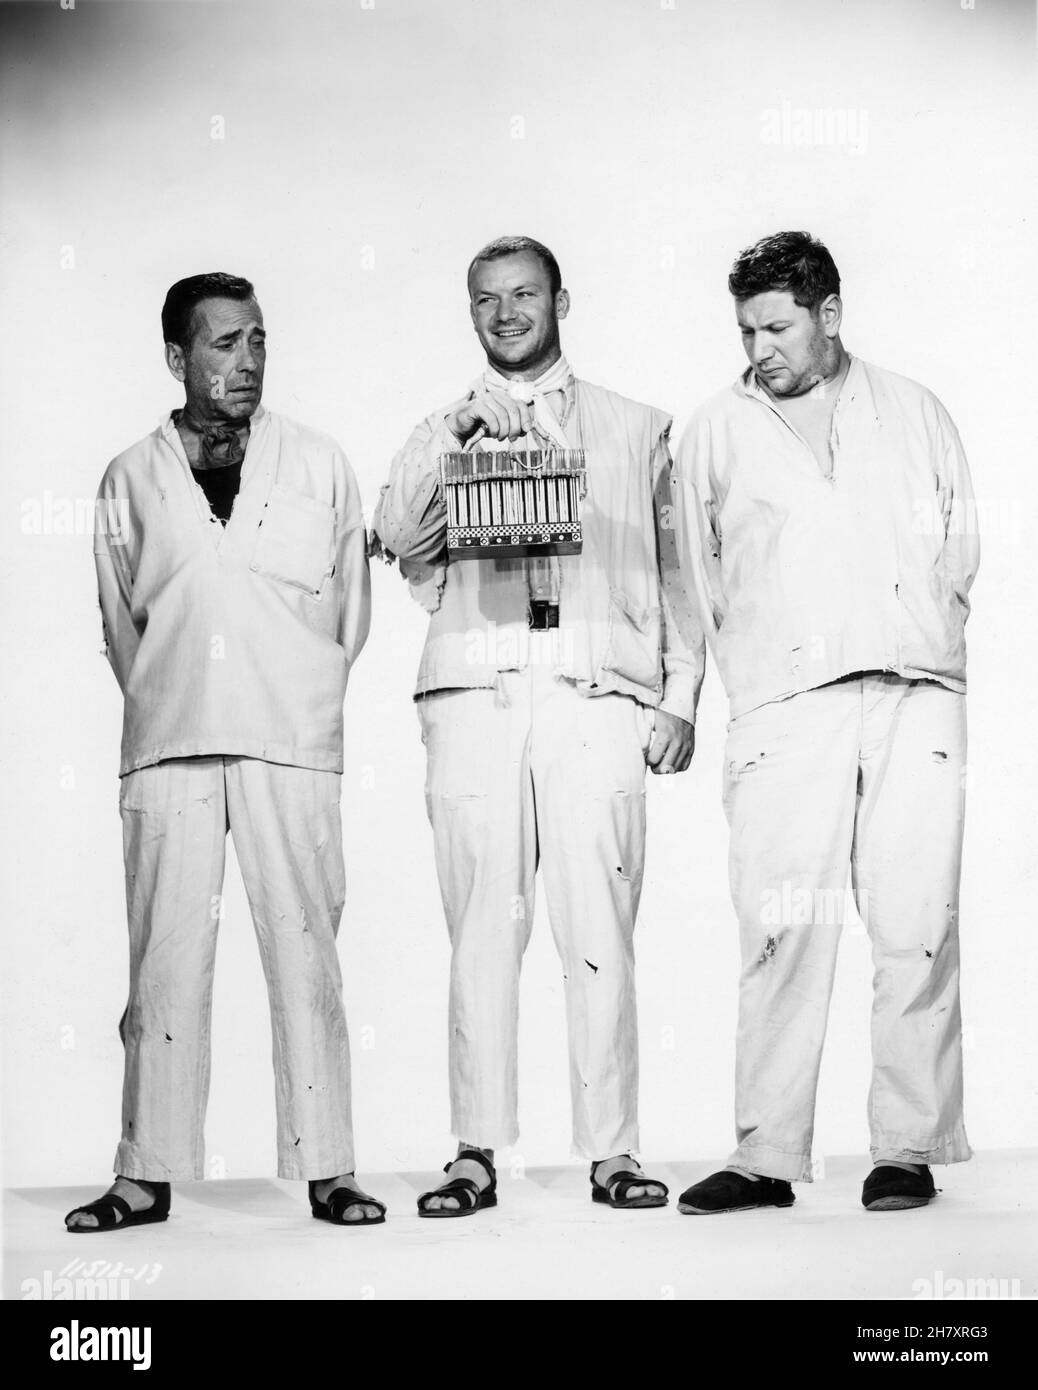 HUMPHREY BOGART as Joseph ALDO RAY as Albert and PETER USTINOV as Jules in WE'RE NO ANGELS 1955 director MICHAEL CURTIZ play Albert Husson costume design Mary Grant Paramount Pictures Stock Photo